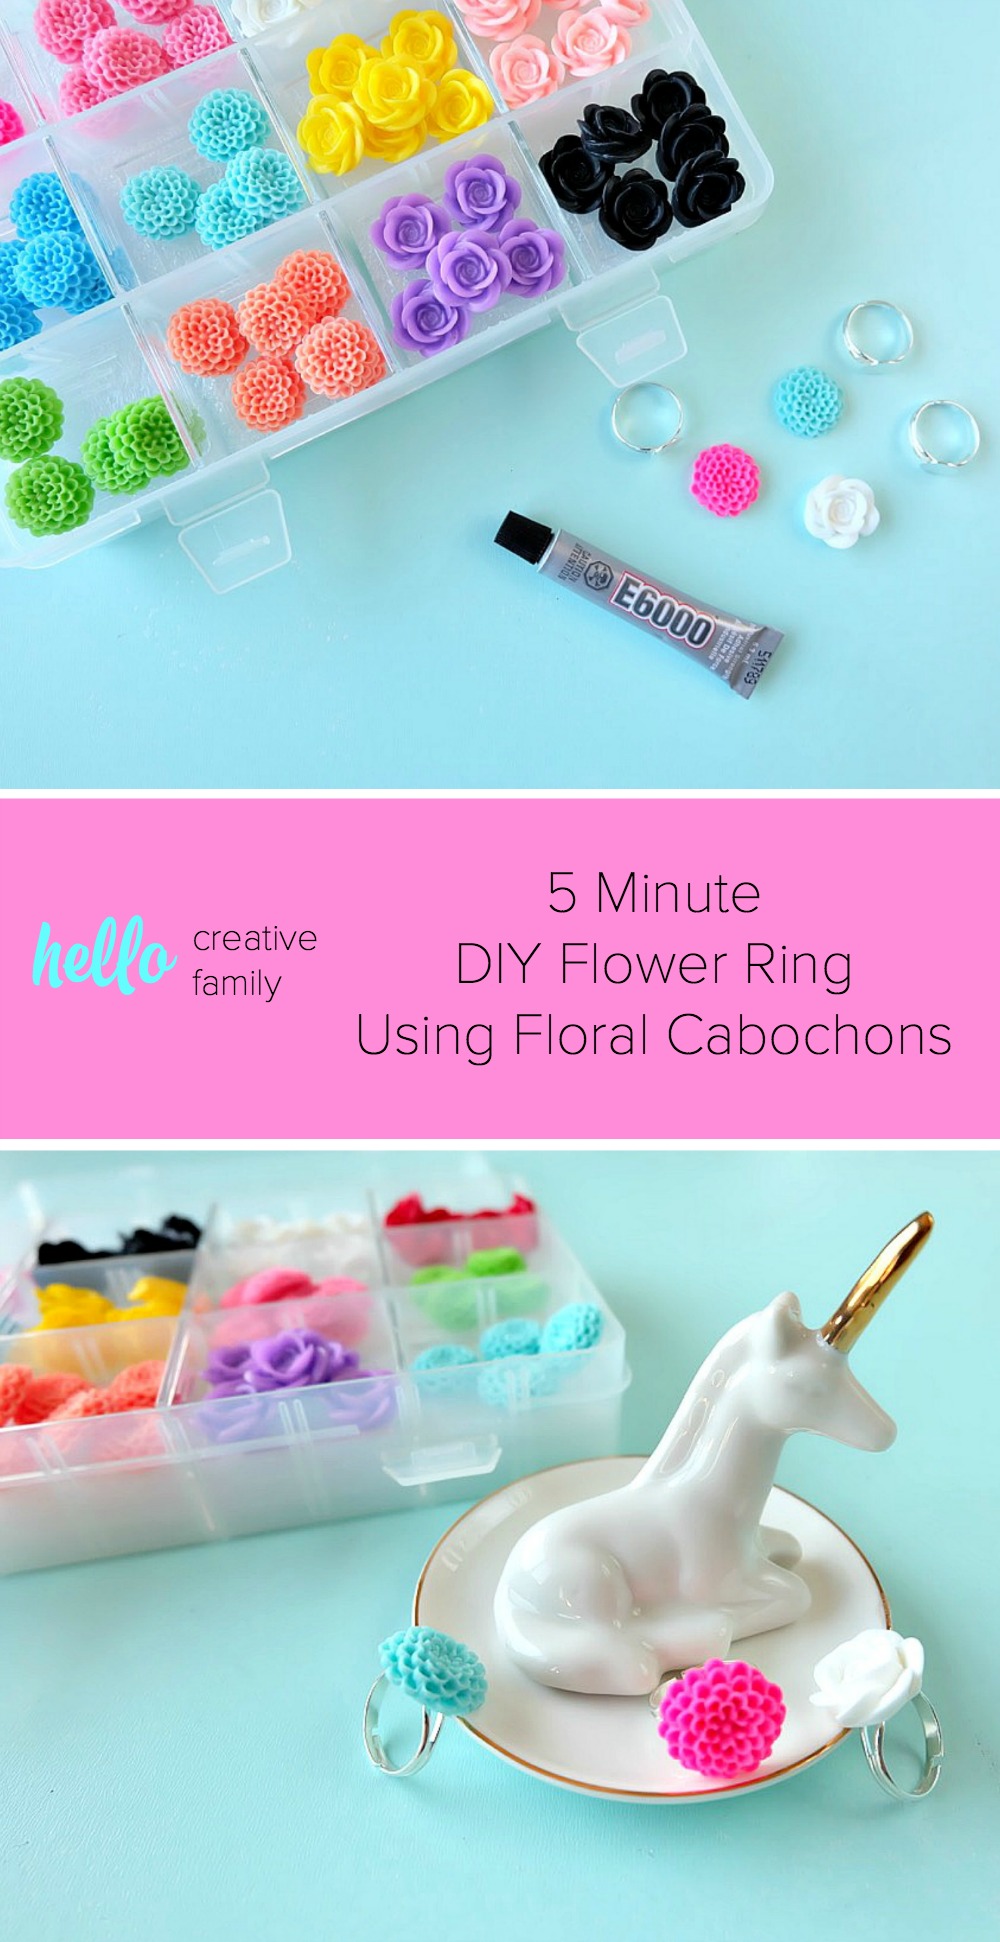 5 minutes is all it takes to make a beautiful DIY flower ring using floral cabochons! Bright & colorful these rings make a fun and easy handmade gift or party favor! Perfect for birthday parties, wedding showers, teacher gifts and friends who love to garden!